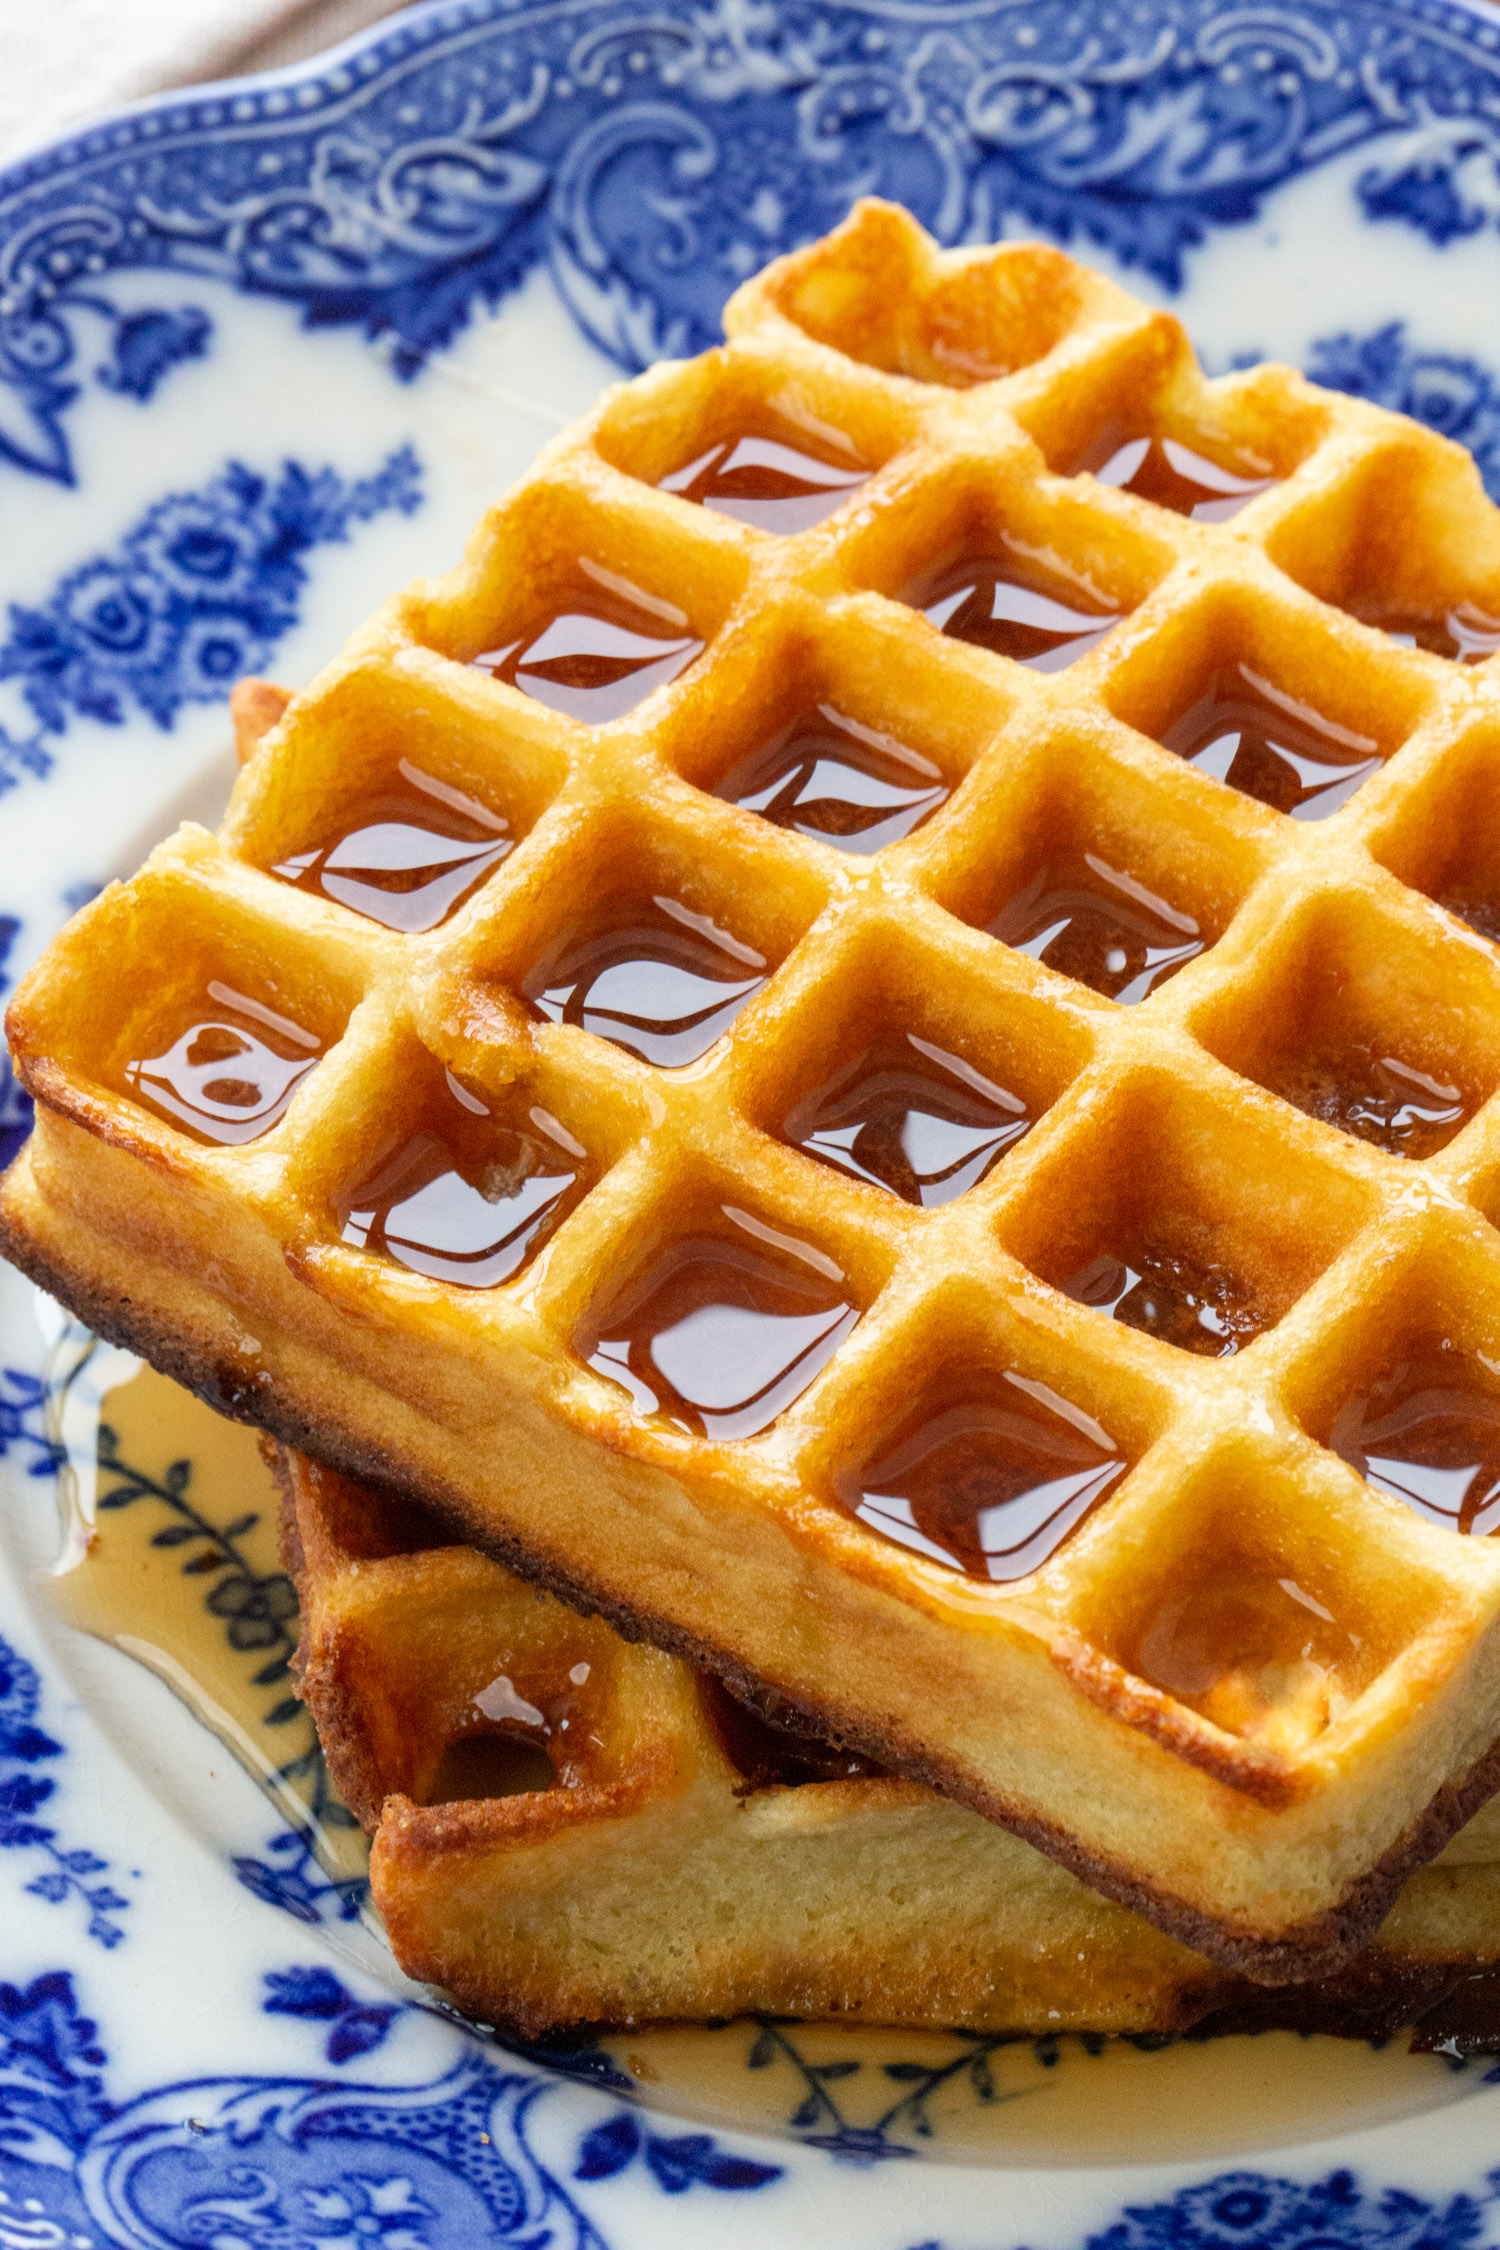 A close up of a low carb waffle on a blue plate.